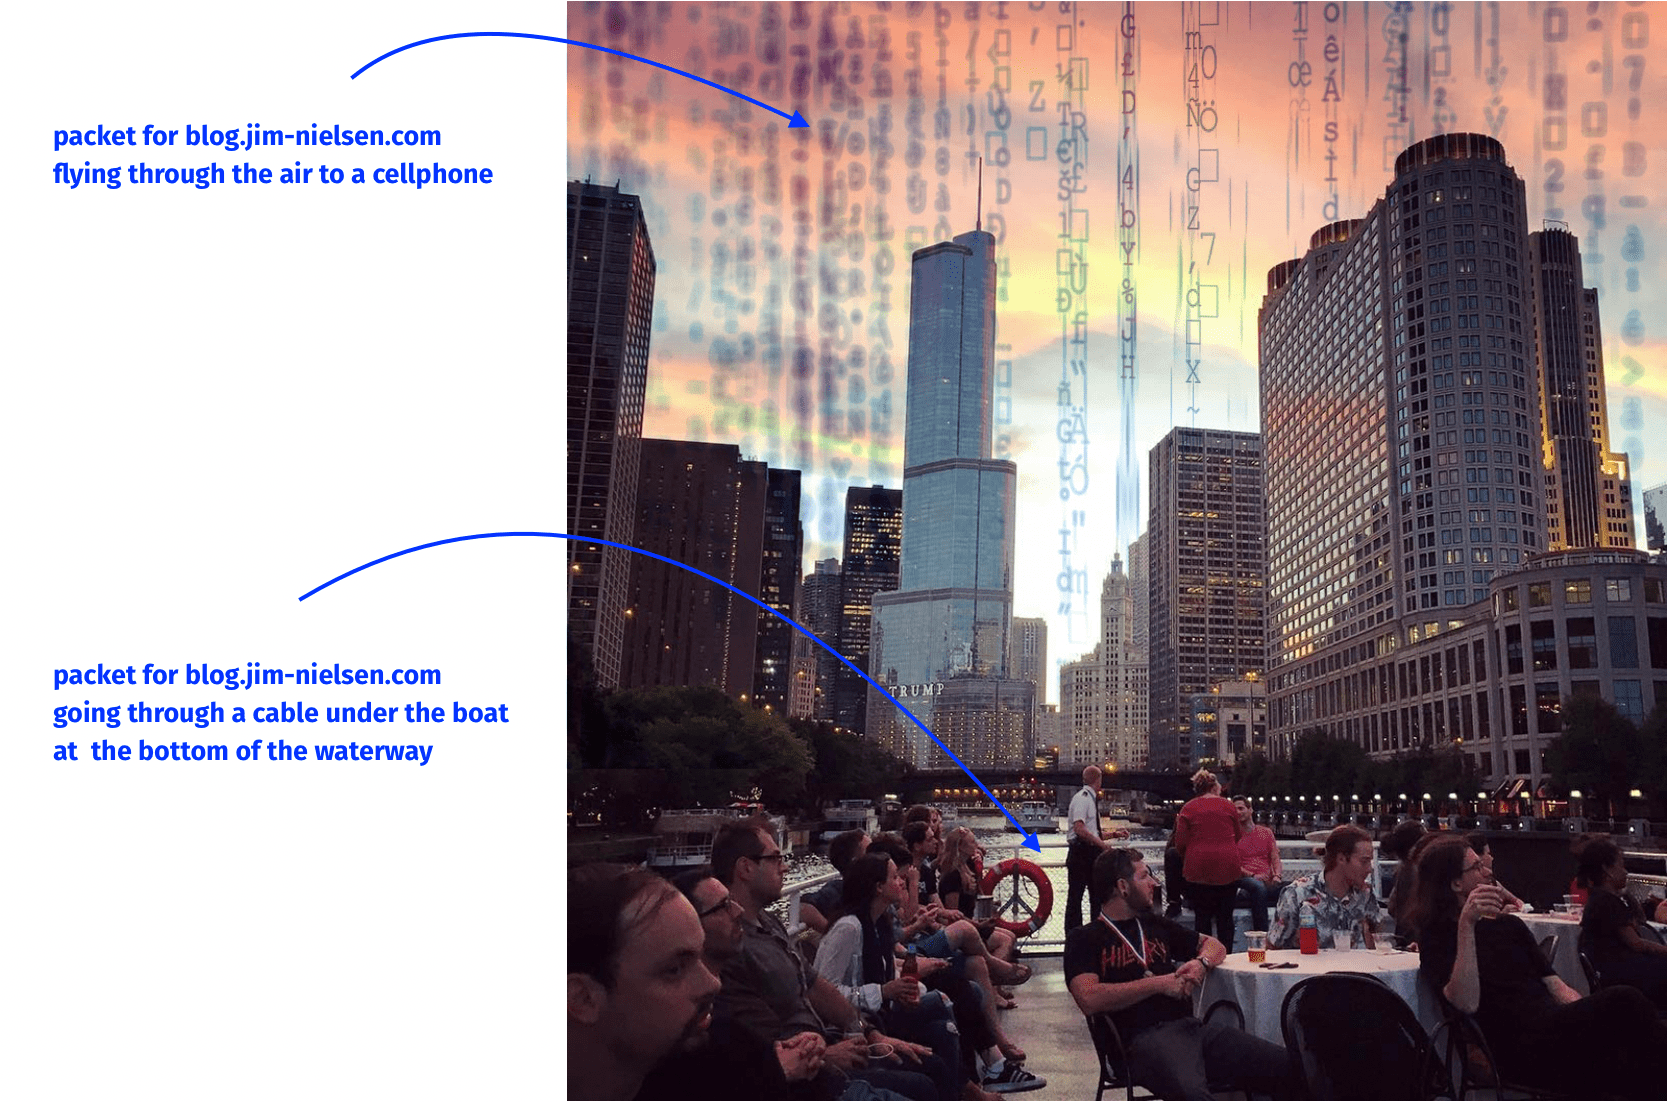 Photograph of people on a boat at sunset in downtown Chicago with random characters mixed into the environment providing the illusion of data embedded in the physical world.